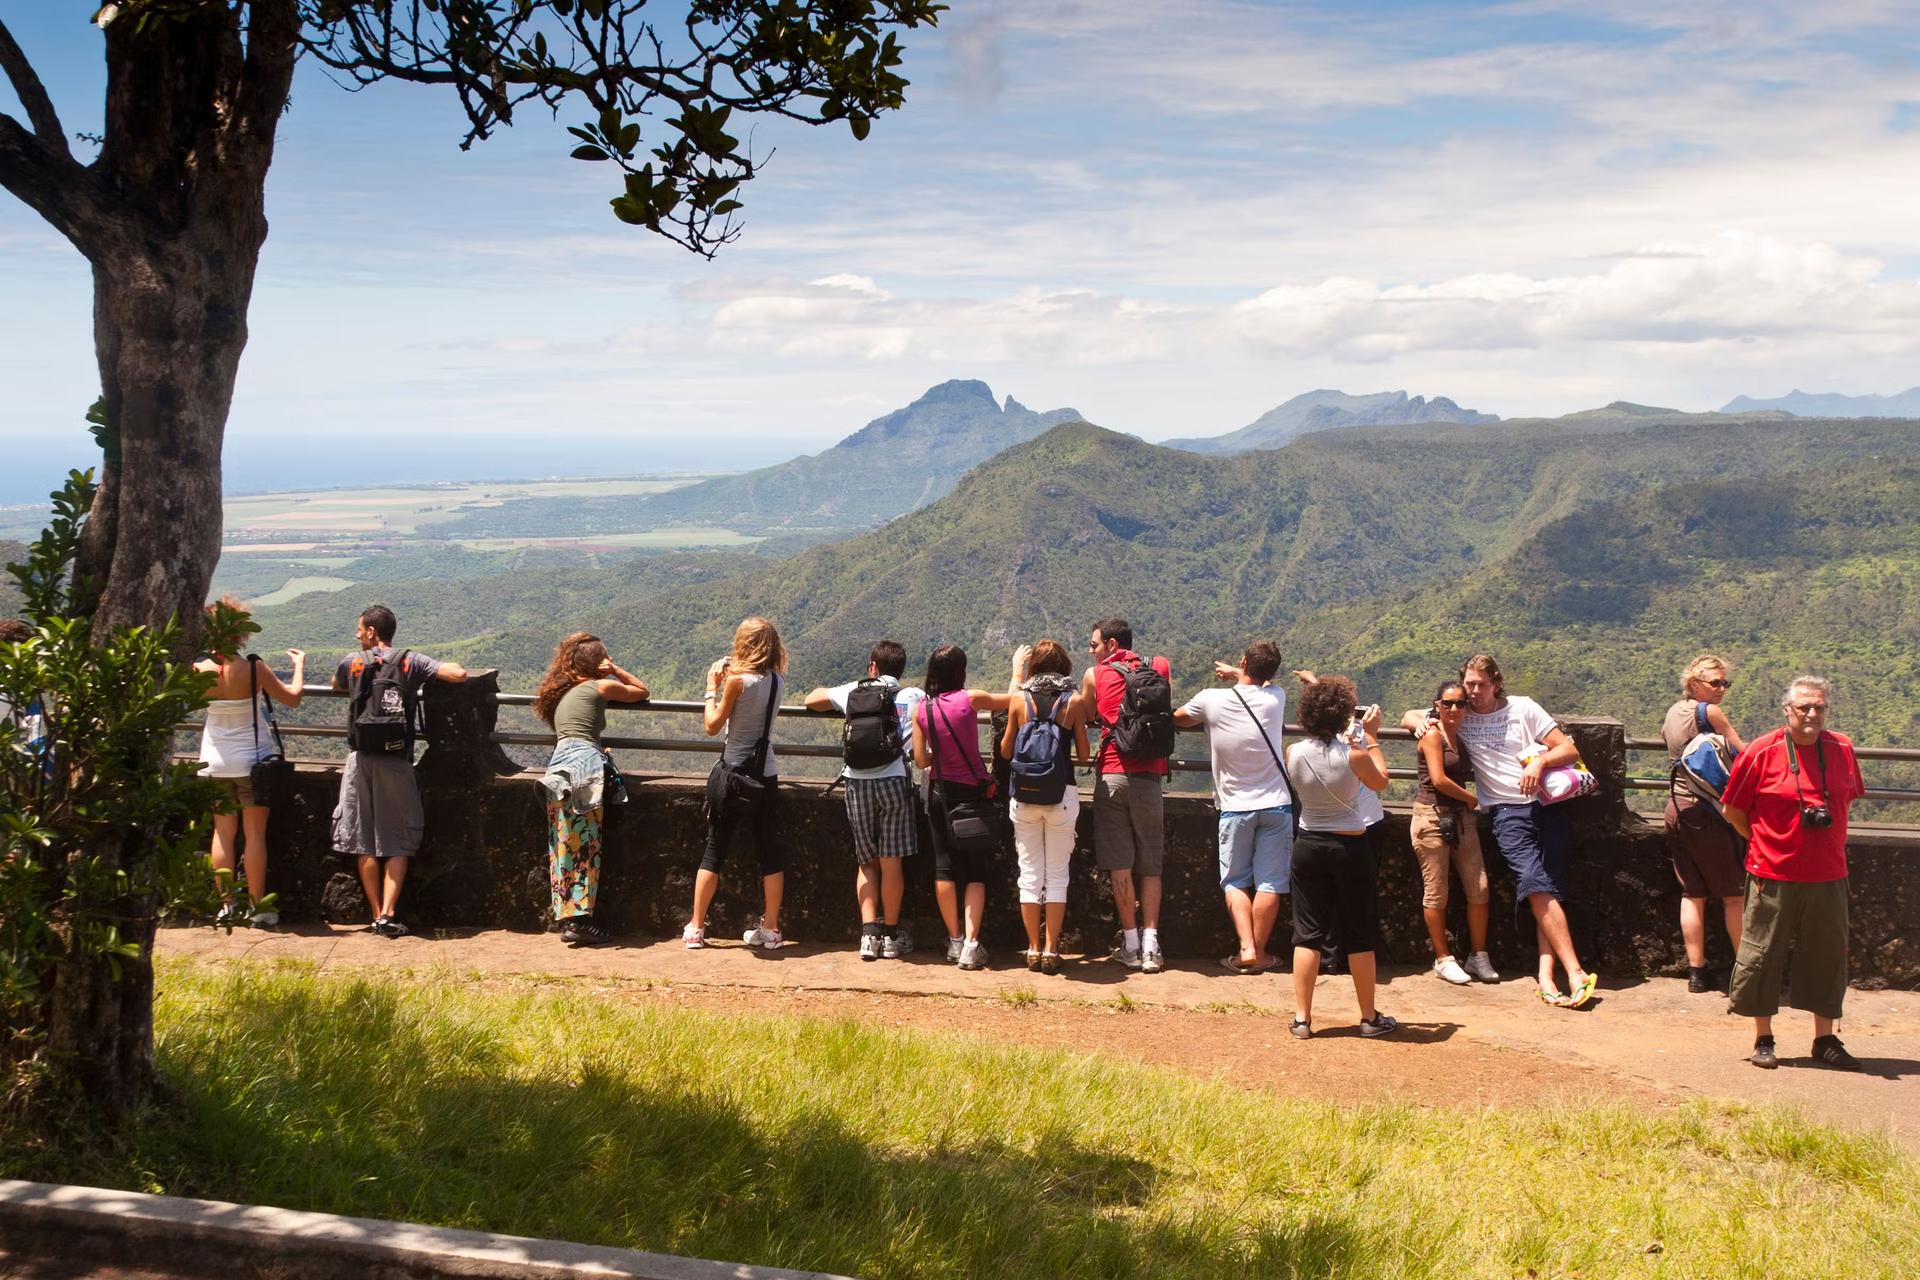 People looking out and taking pictures at a viewpoint in Black River Gorges National Park, Mauritius